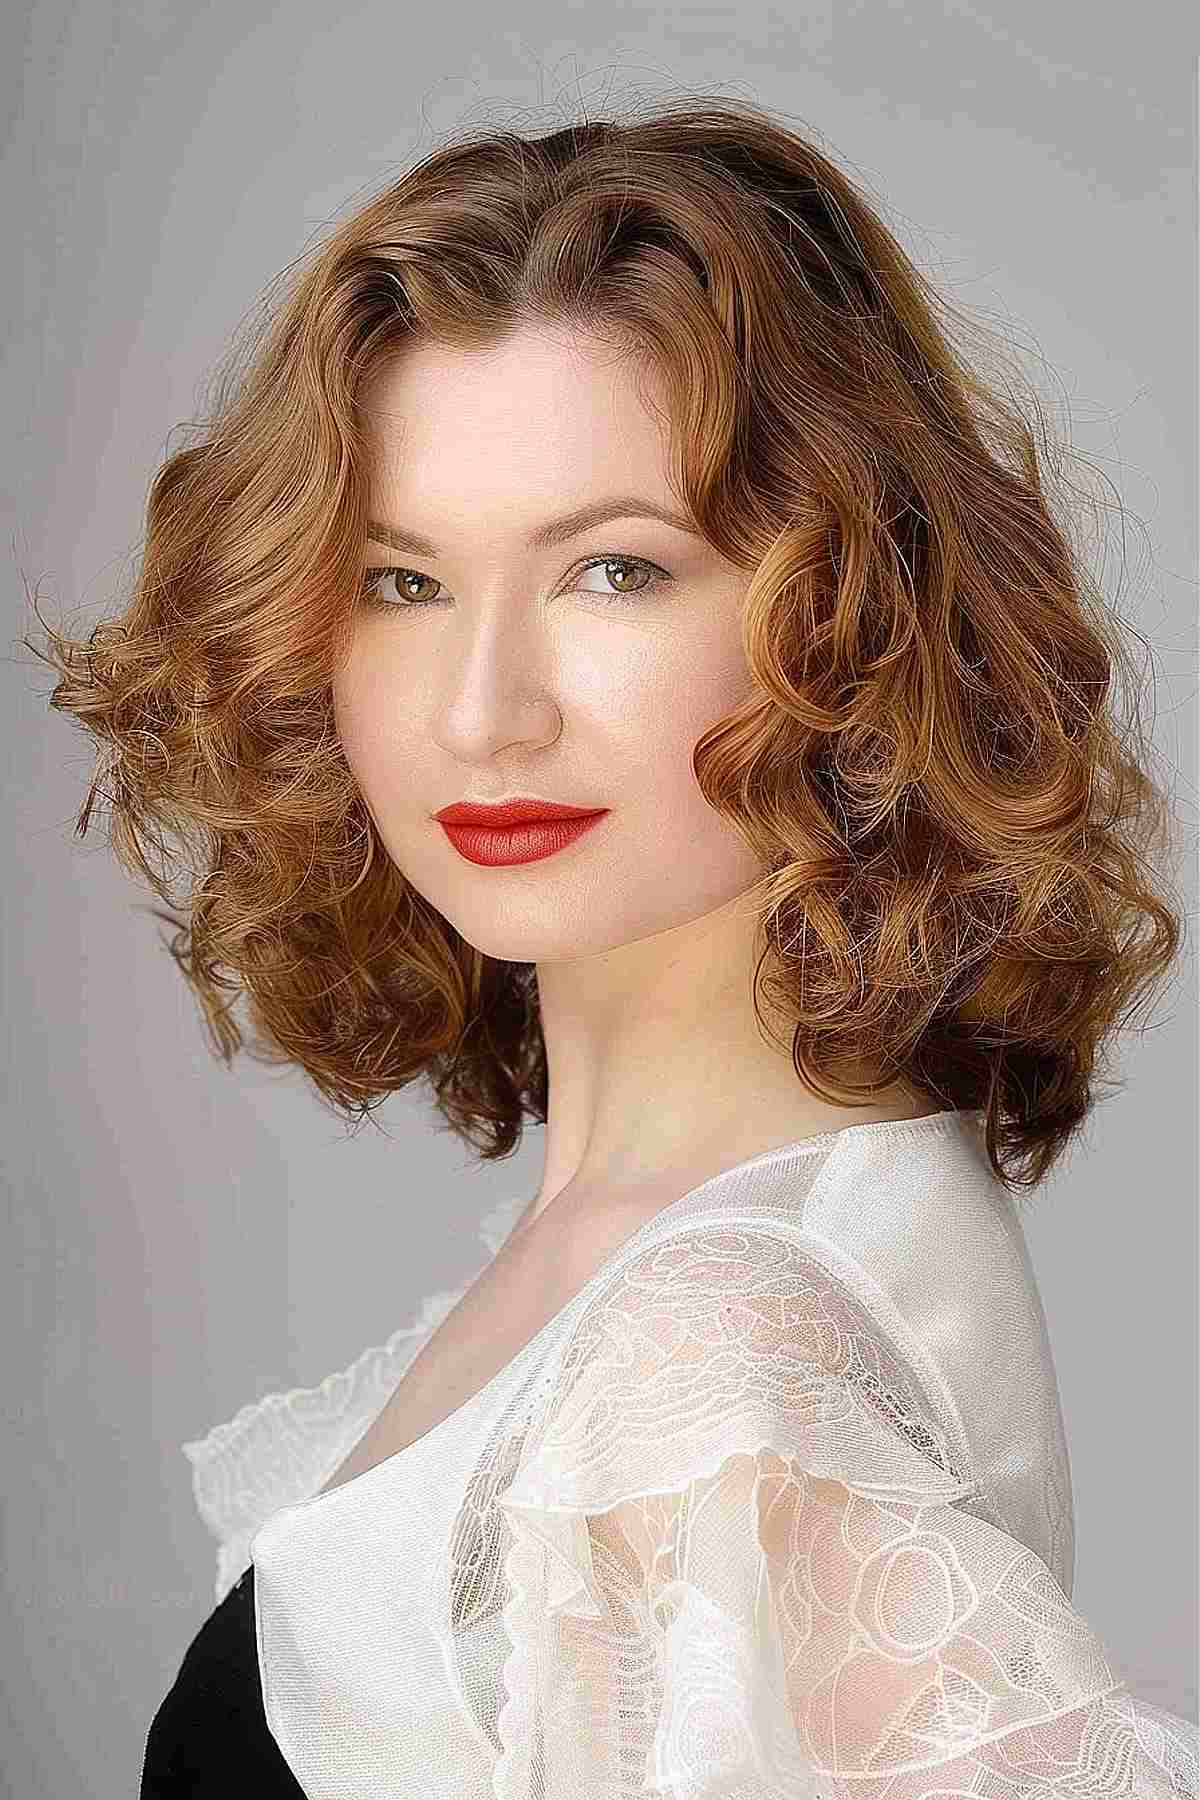 Medium length tapered curls with warm brown-blonde color, showcasing voluminous and playful texture.